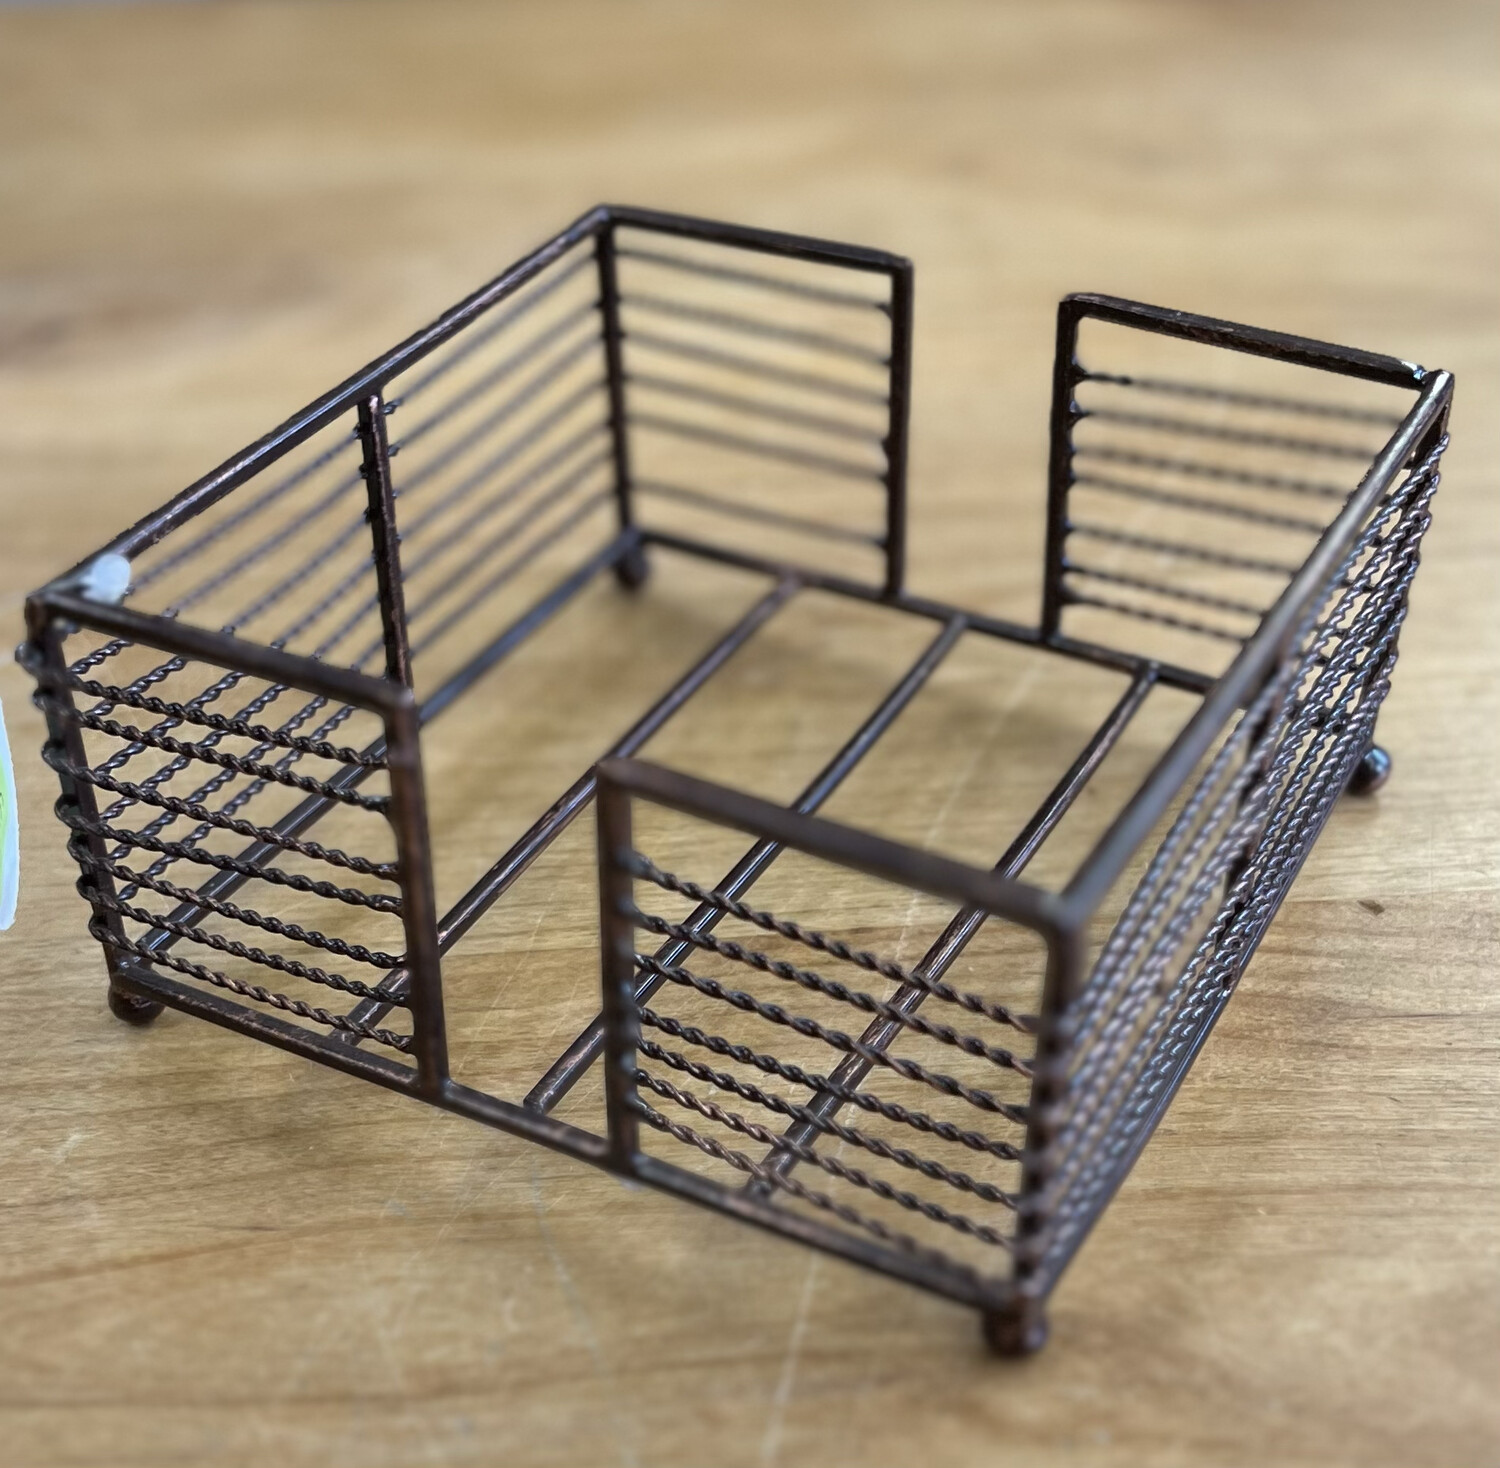 Twisted Wire Cocktail Napkin Holder